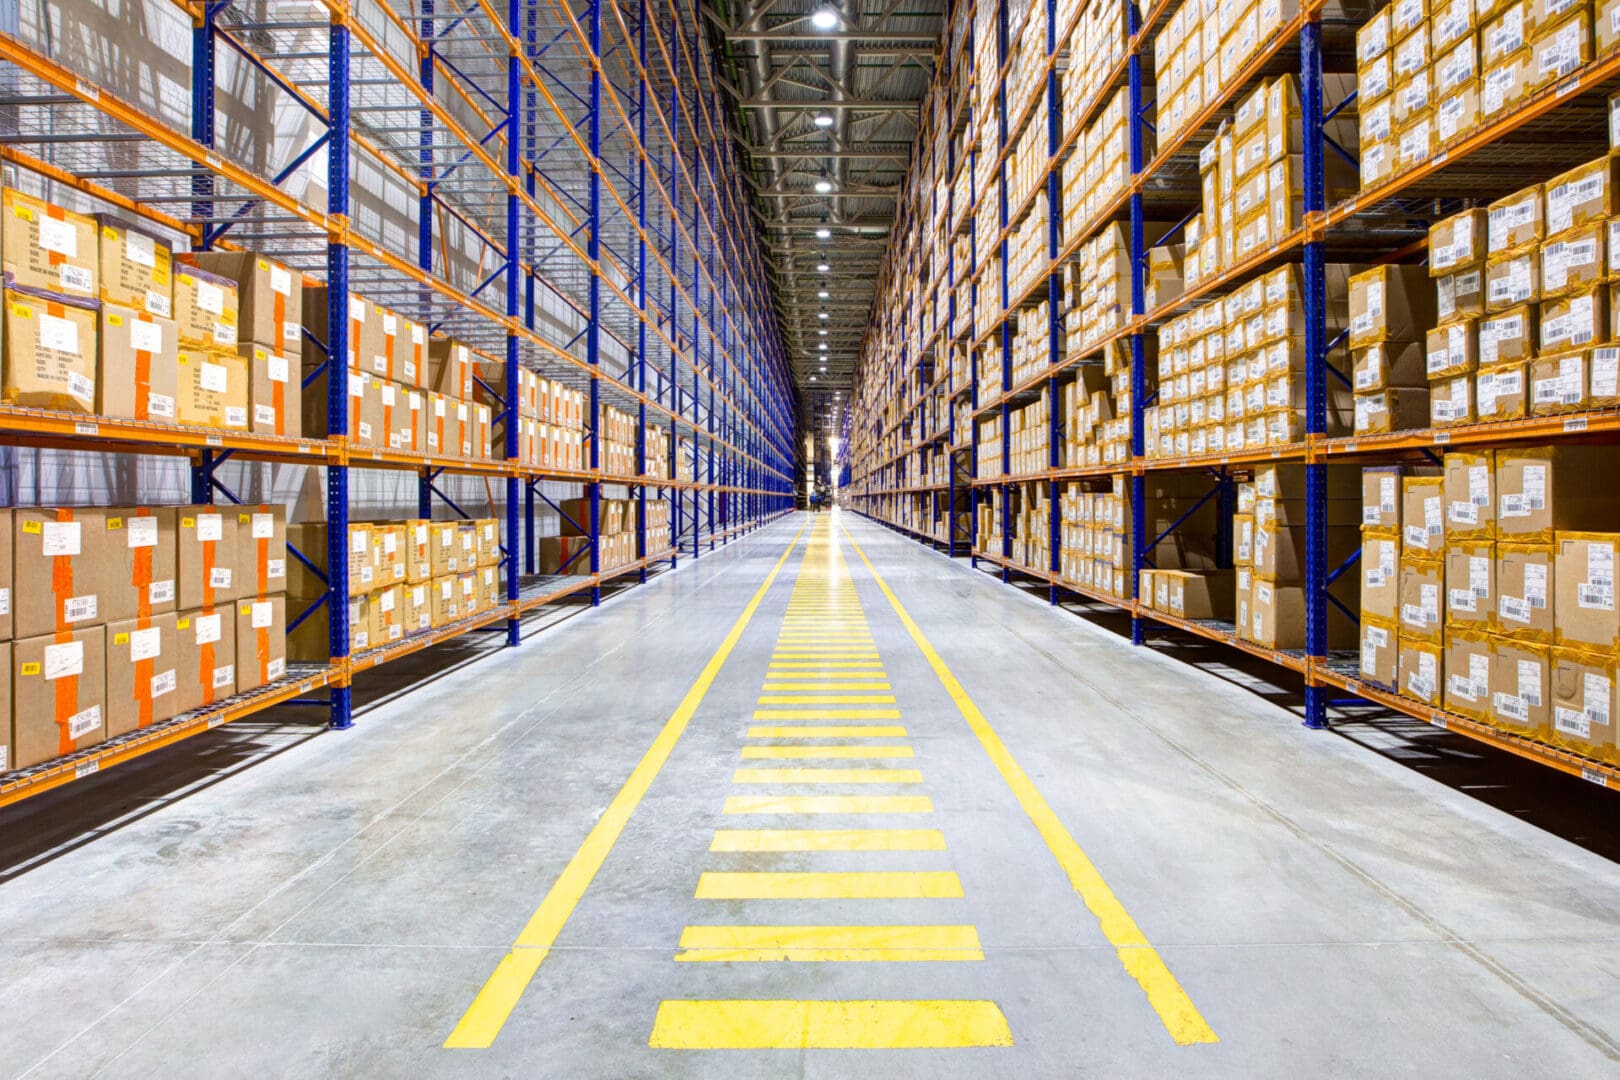 A warehouse with many shelves of boxes and yellow lines.